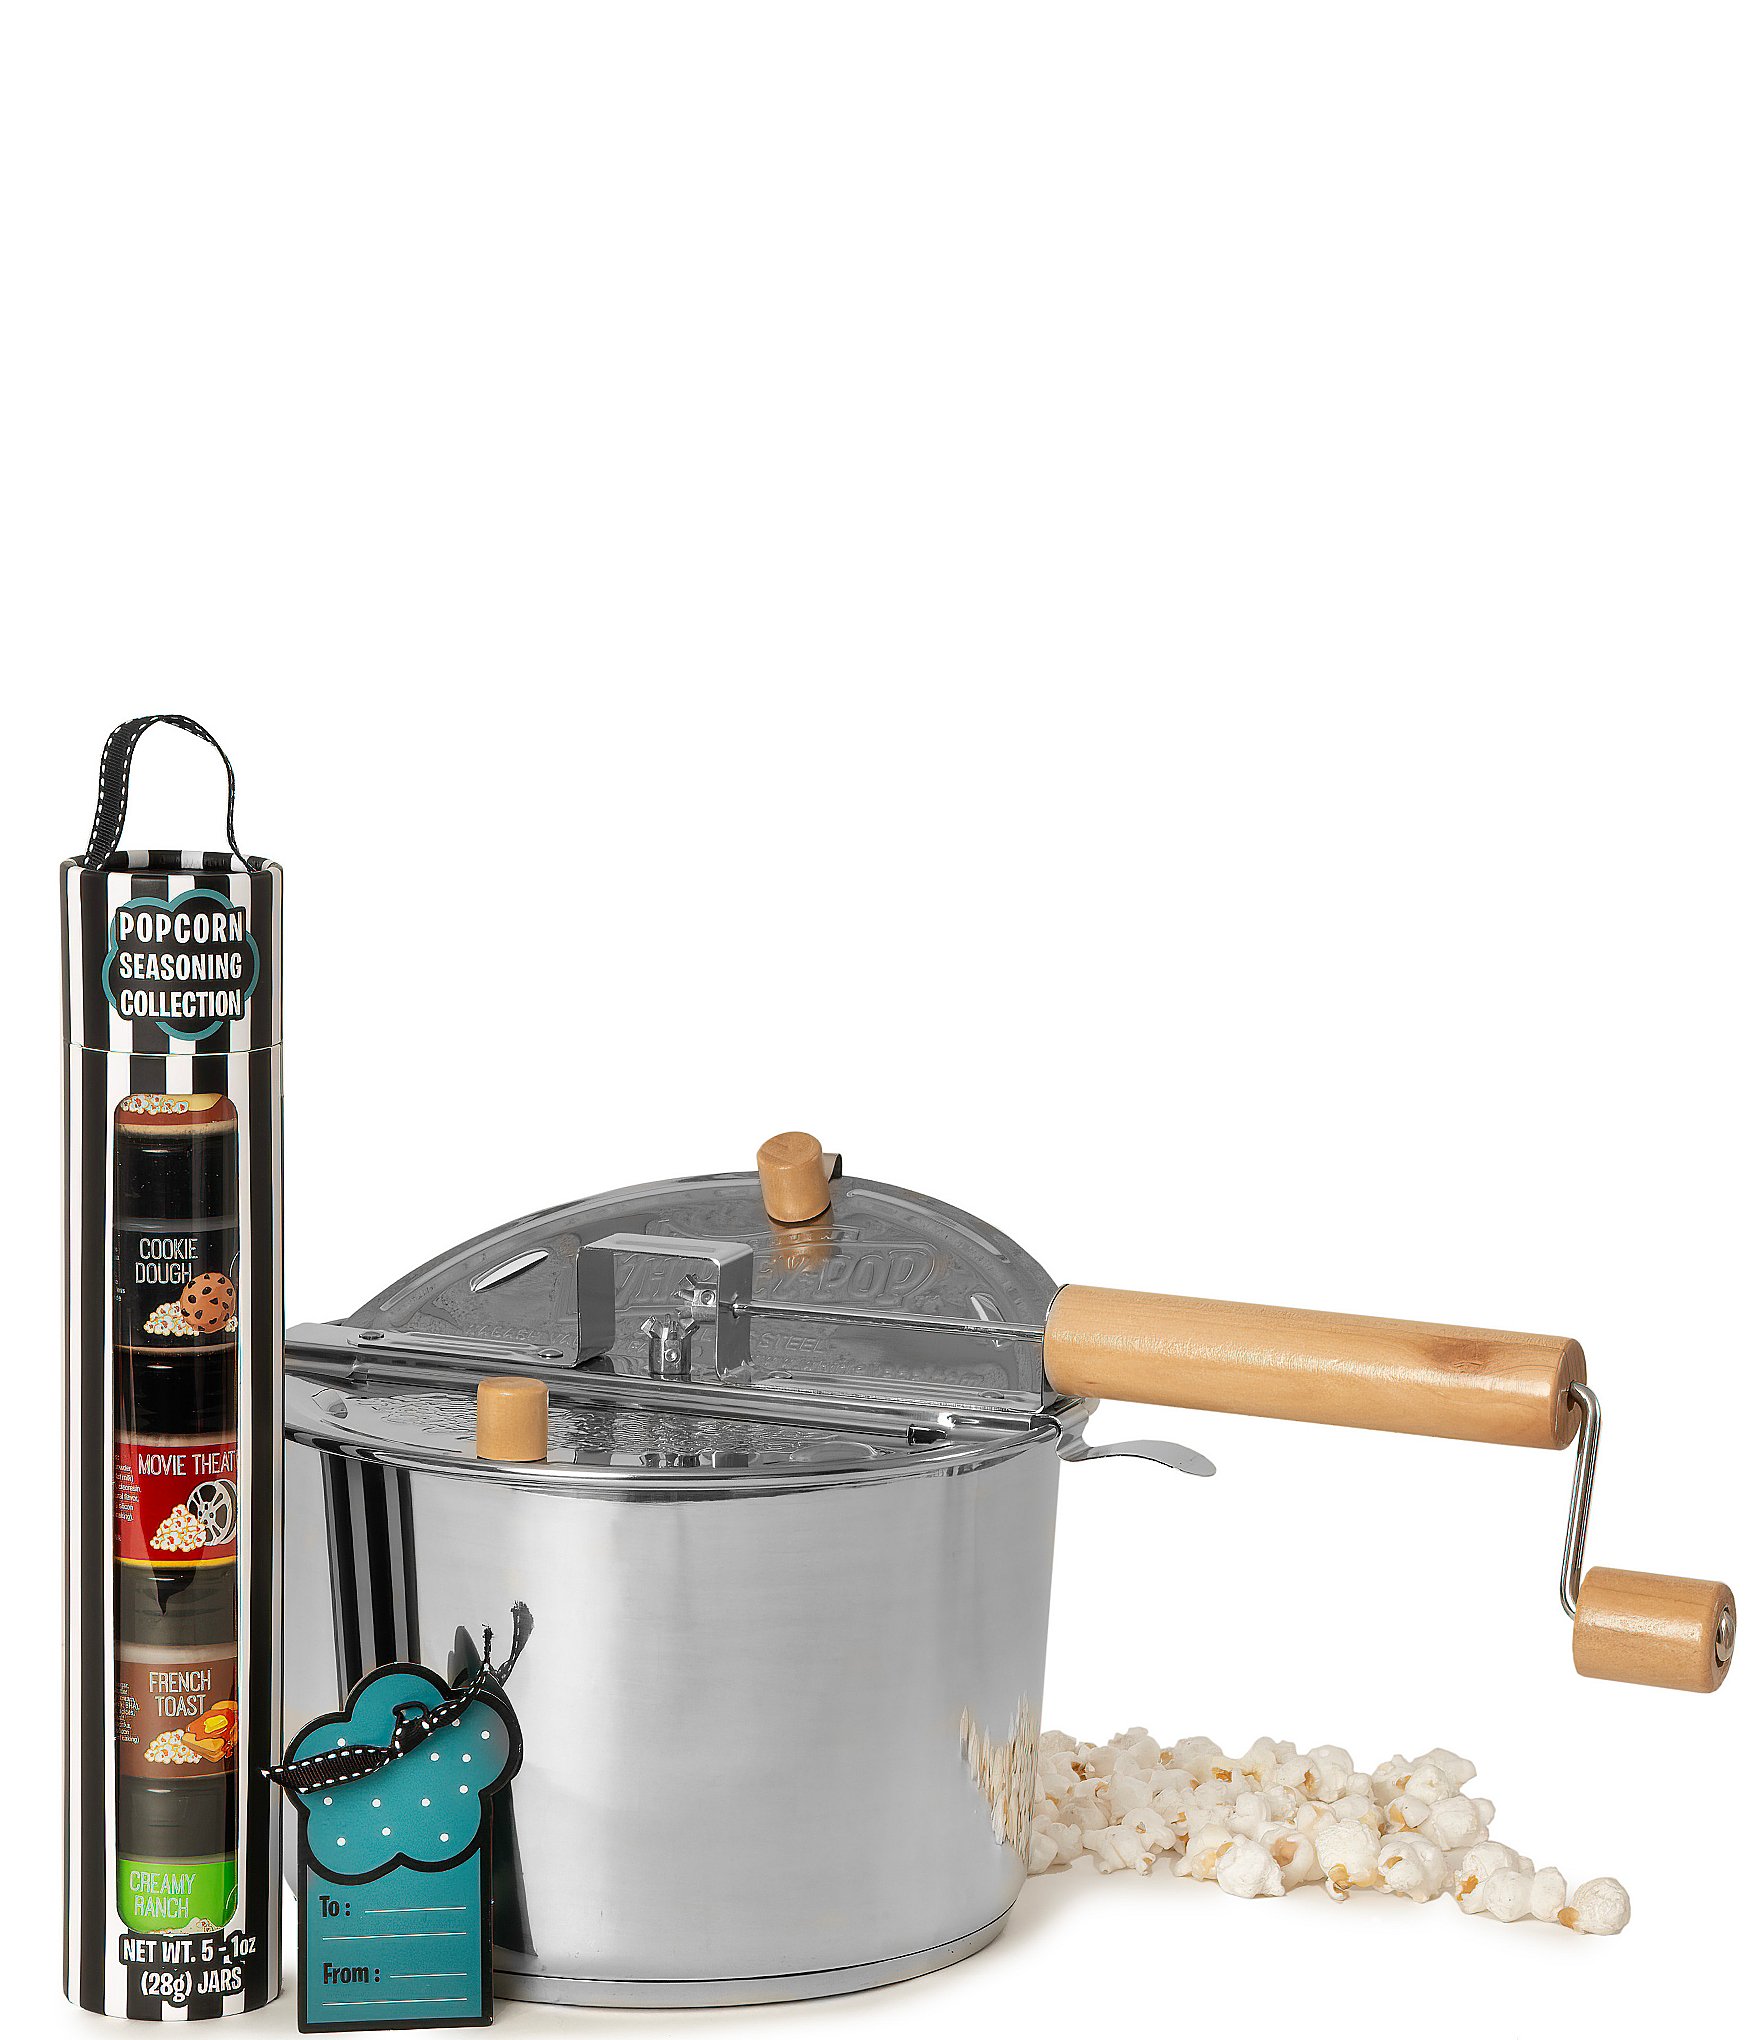 Wabash Valley Farms Copper Plated Stainless Steel Whirley Pop Popcorn Maker  and Cello Popcorn Gift Set